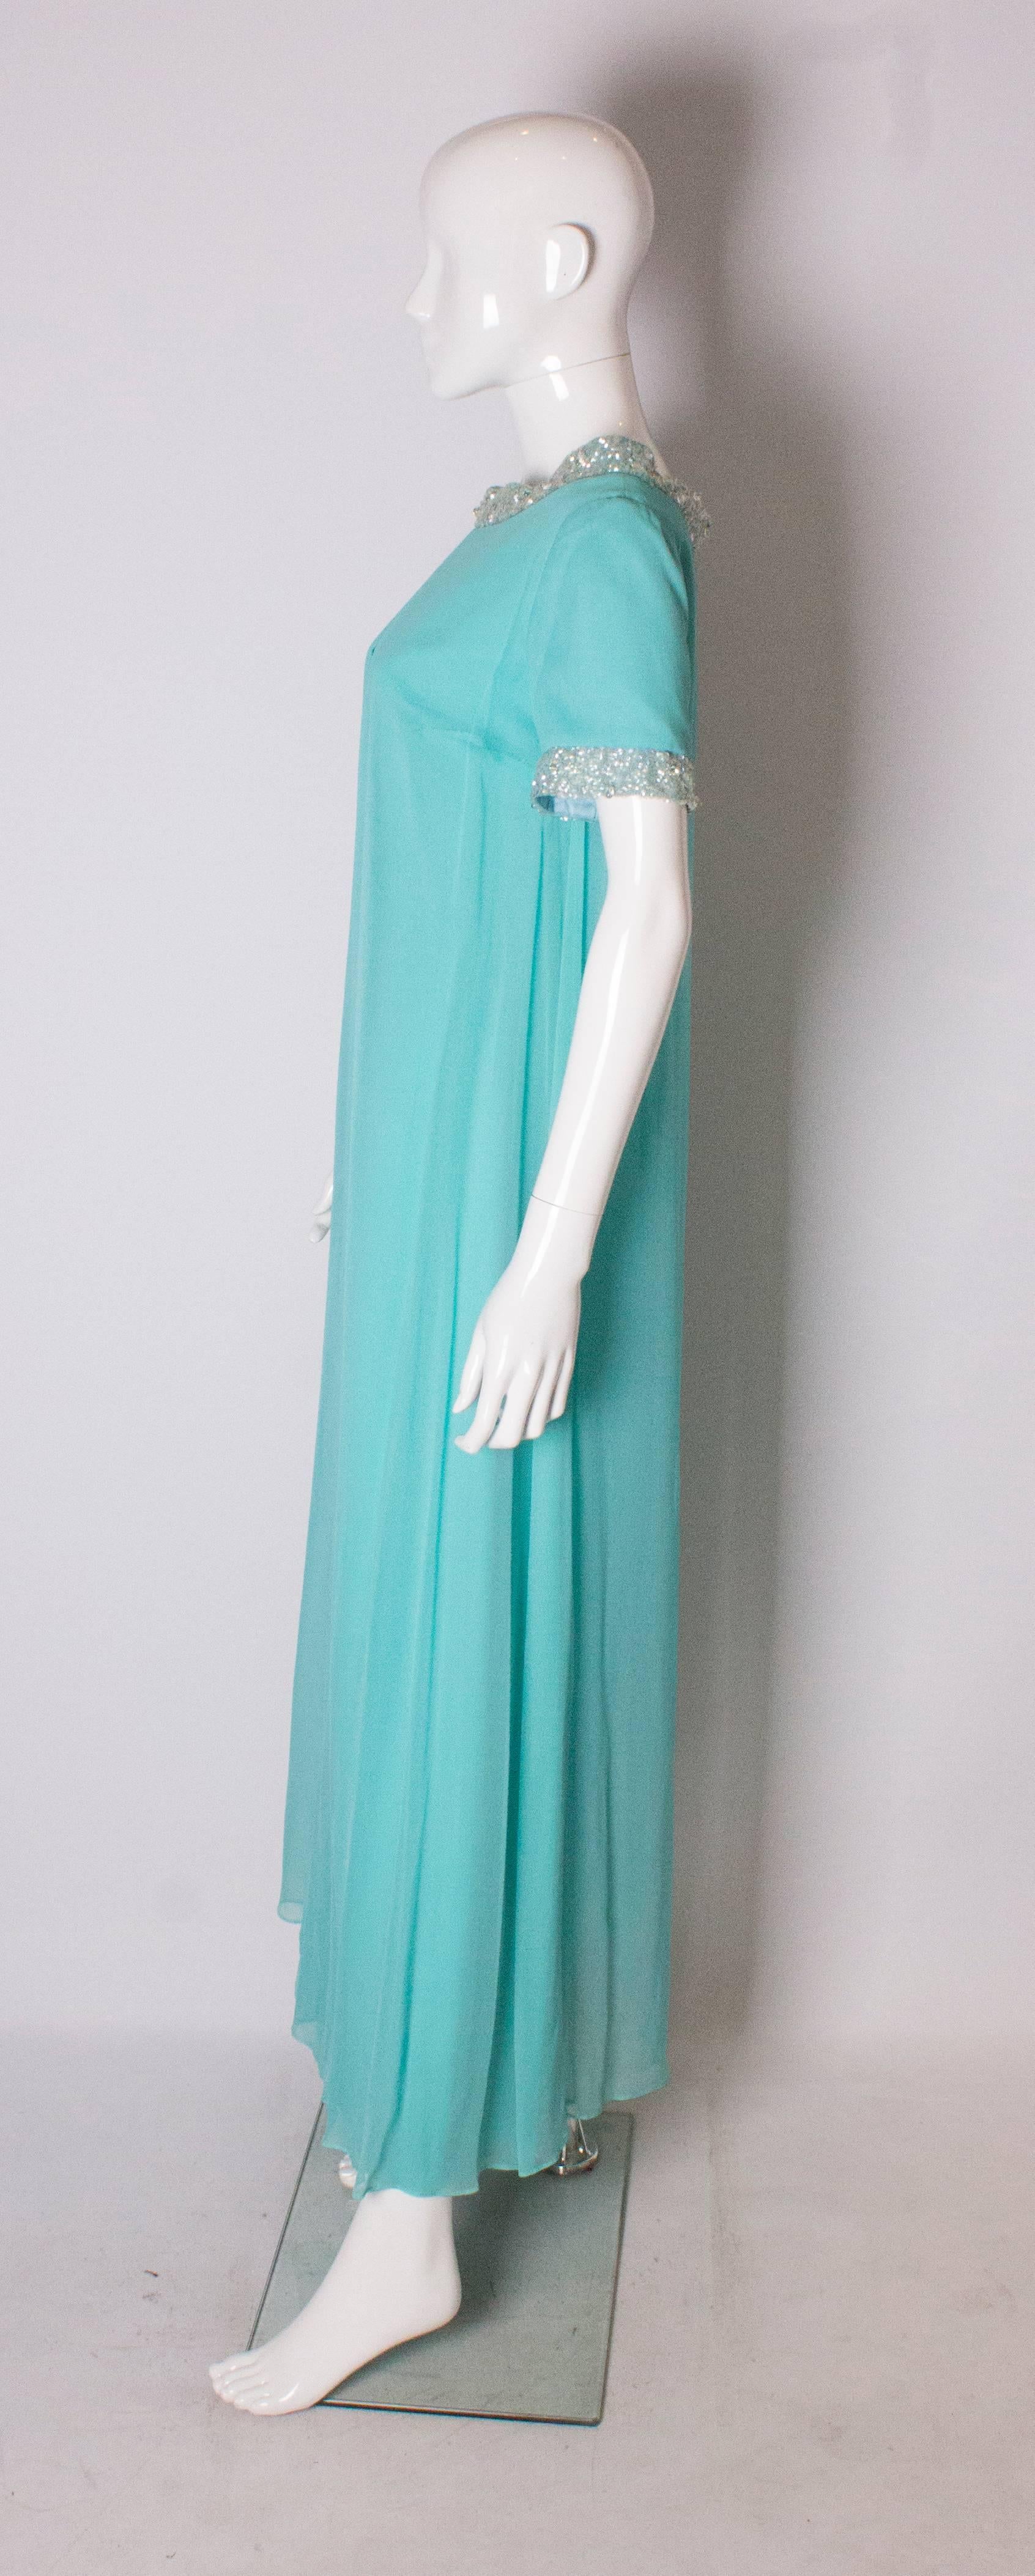 Women's A Vintage 1960s pale blue evening gown by Polmarks Models